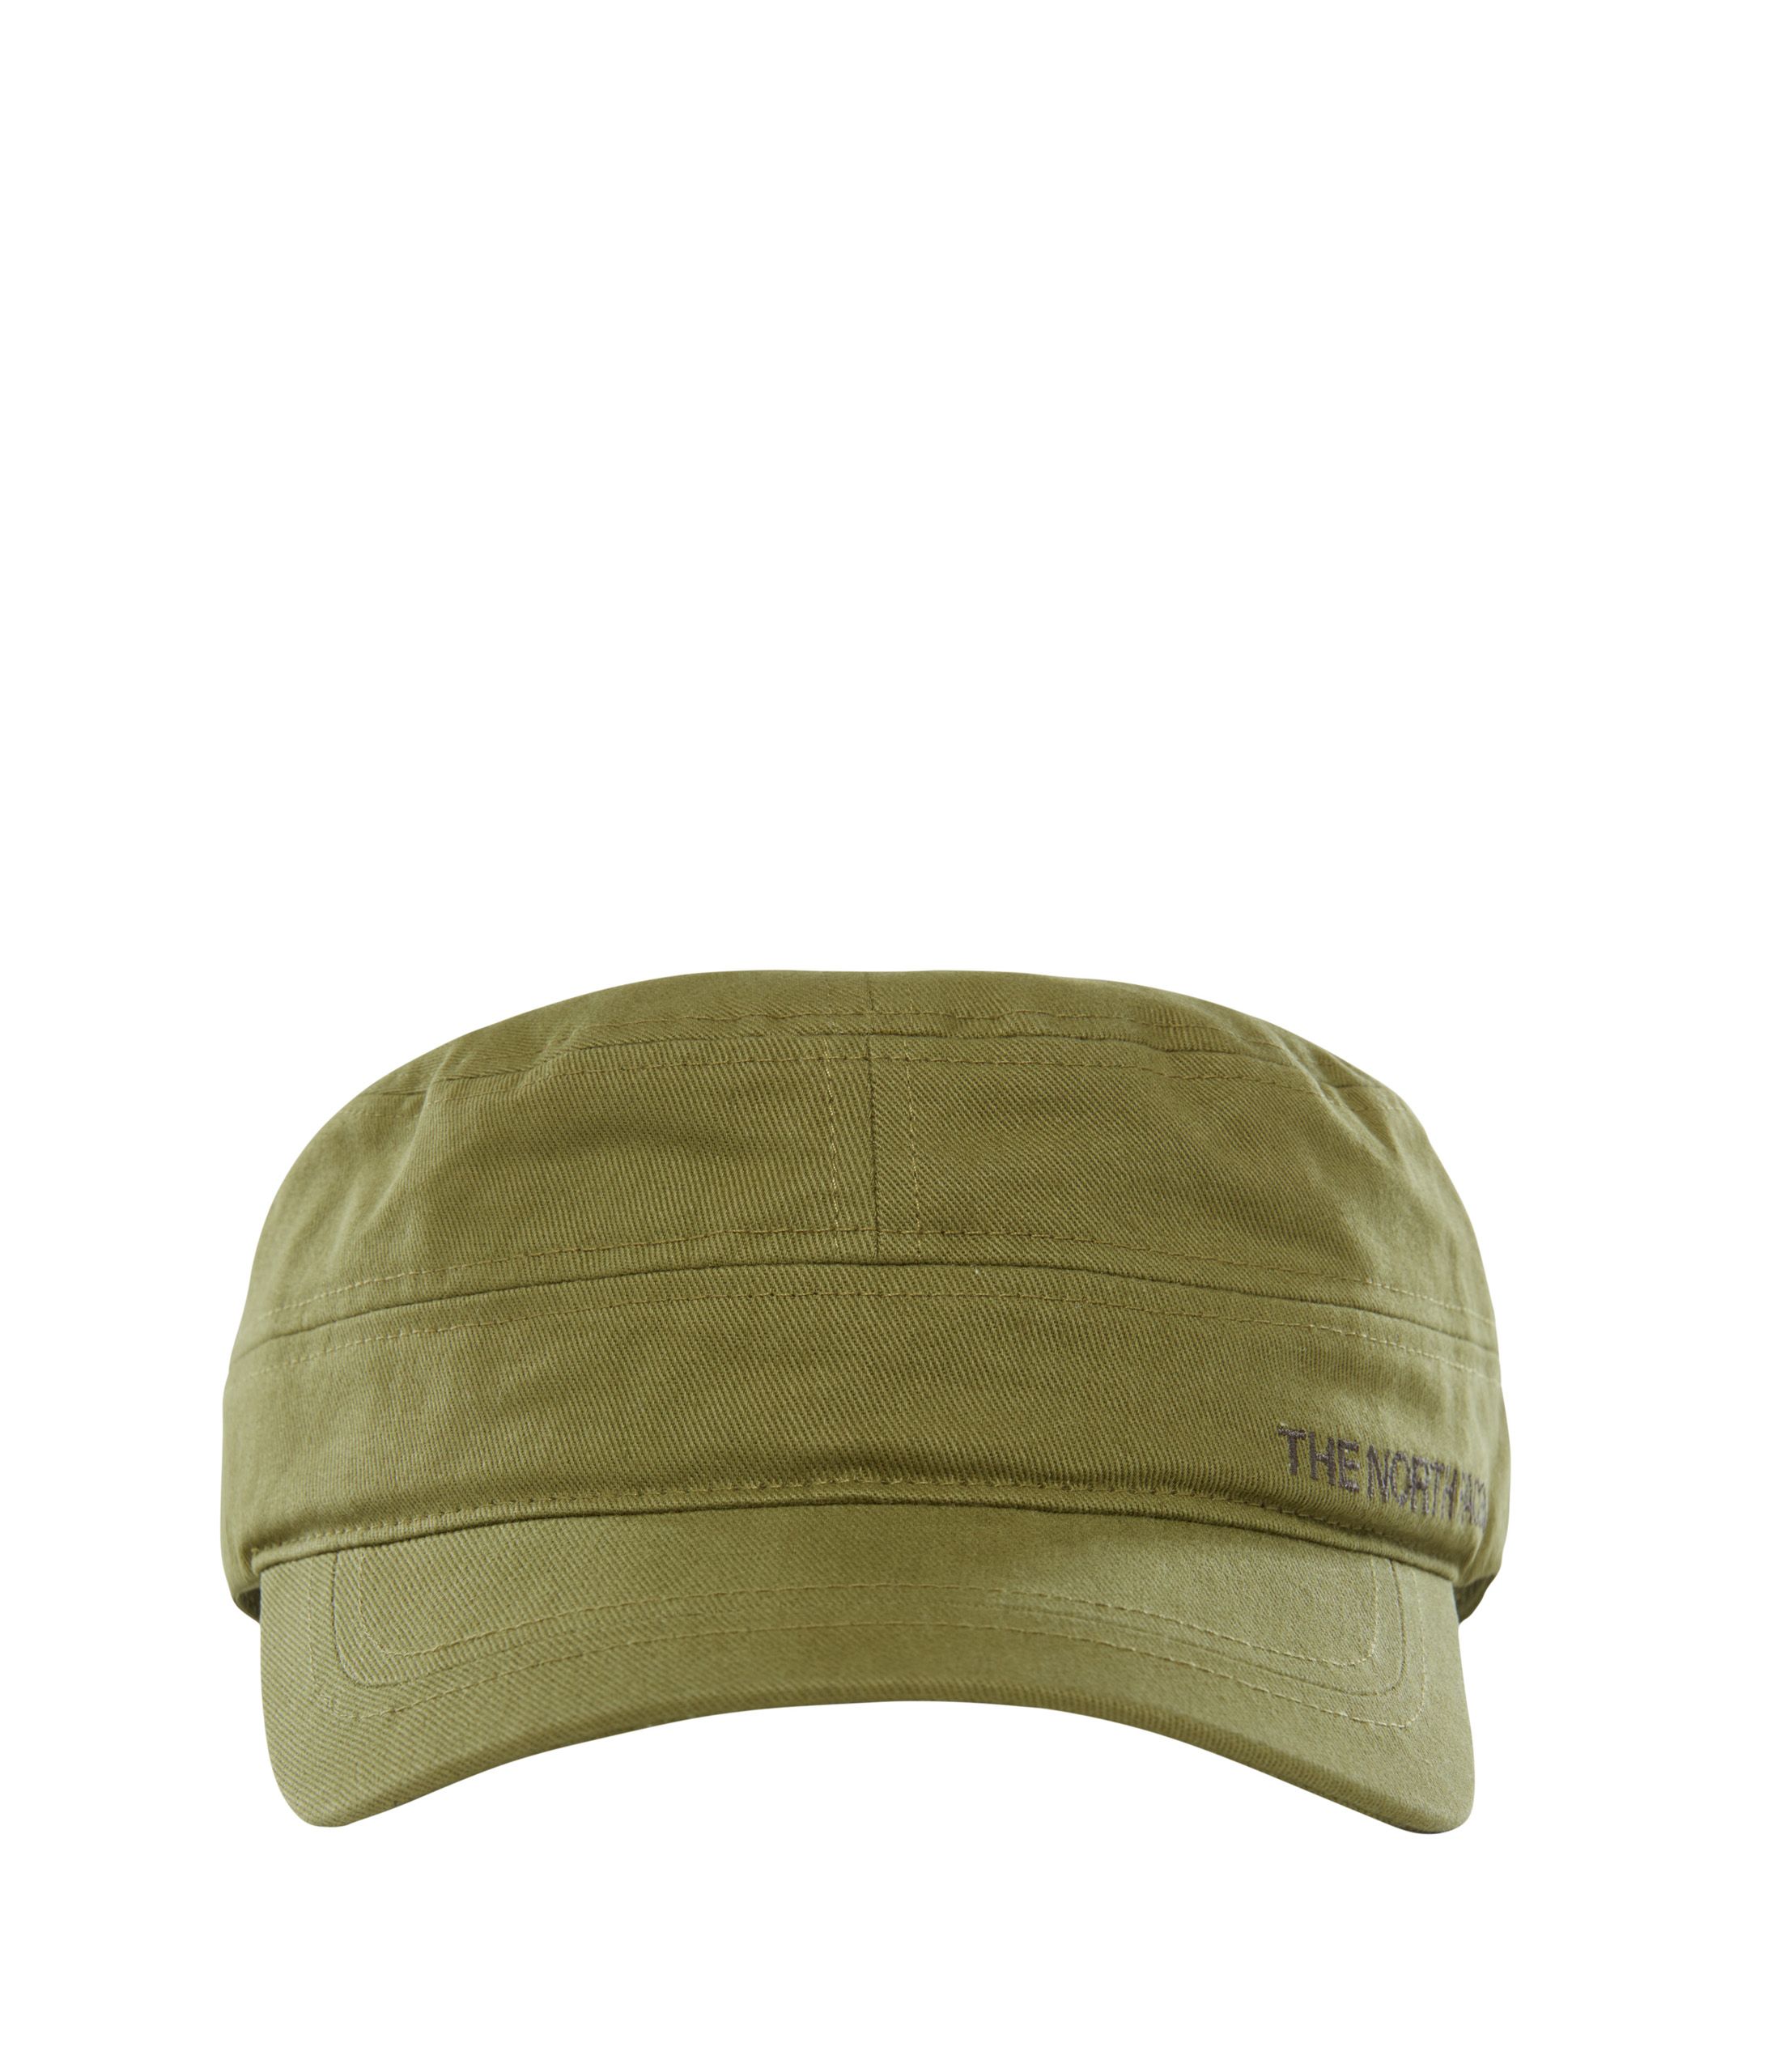 The North Face Logo Military Hat